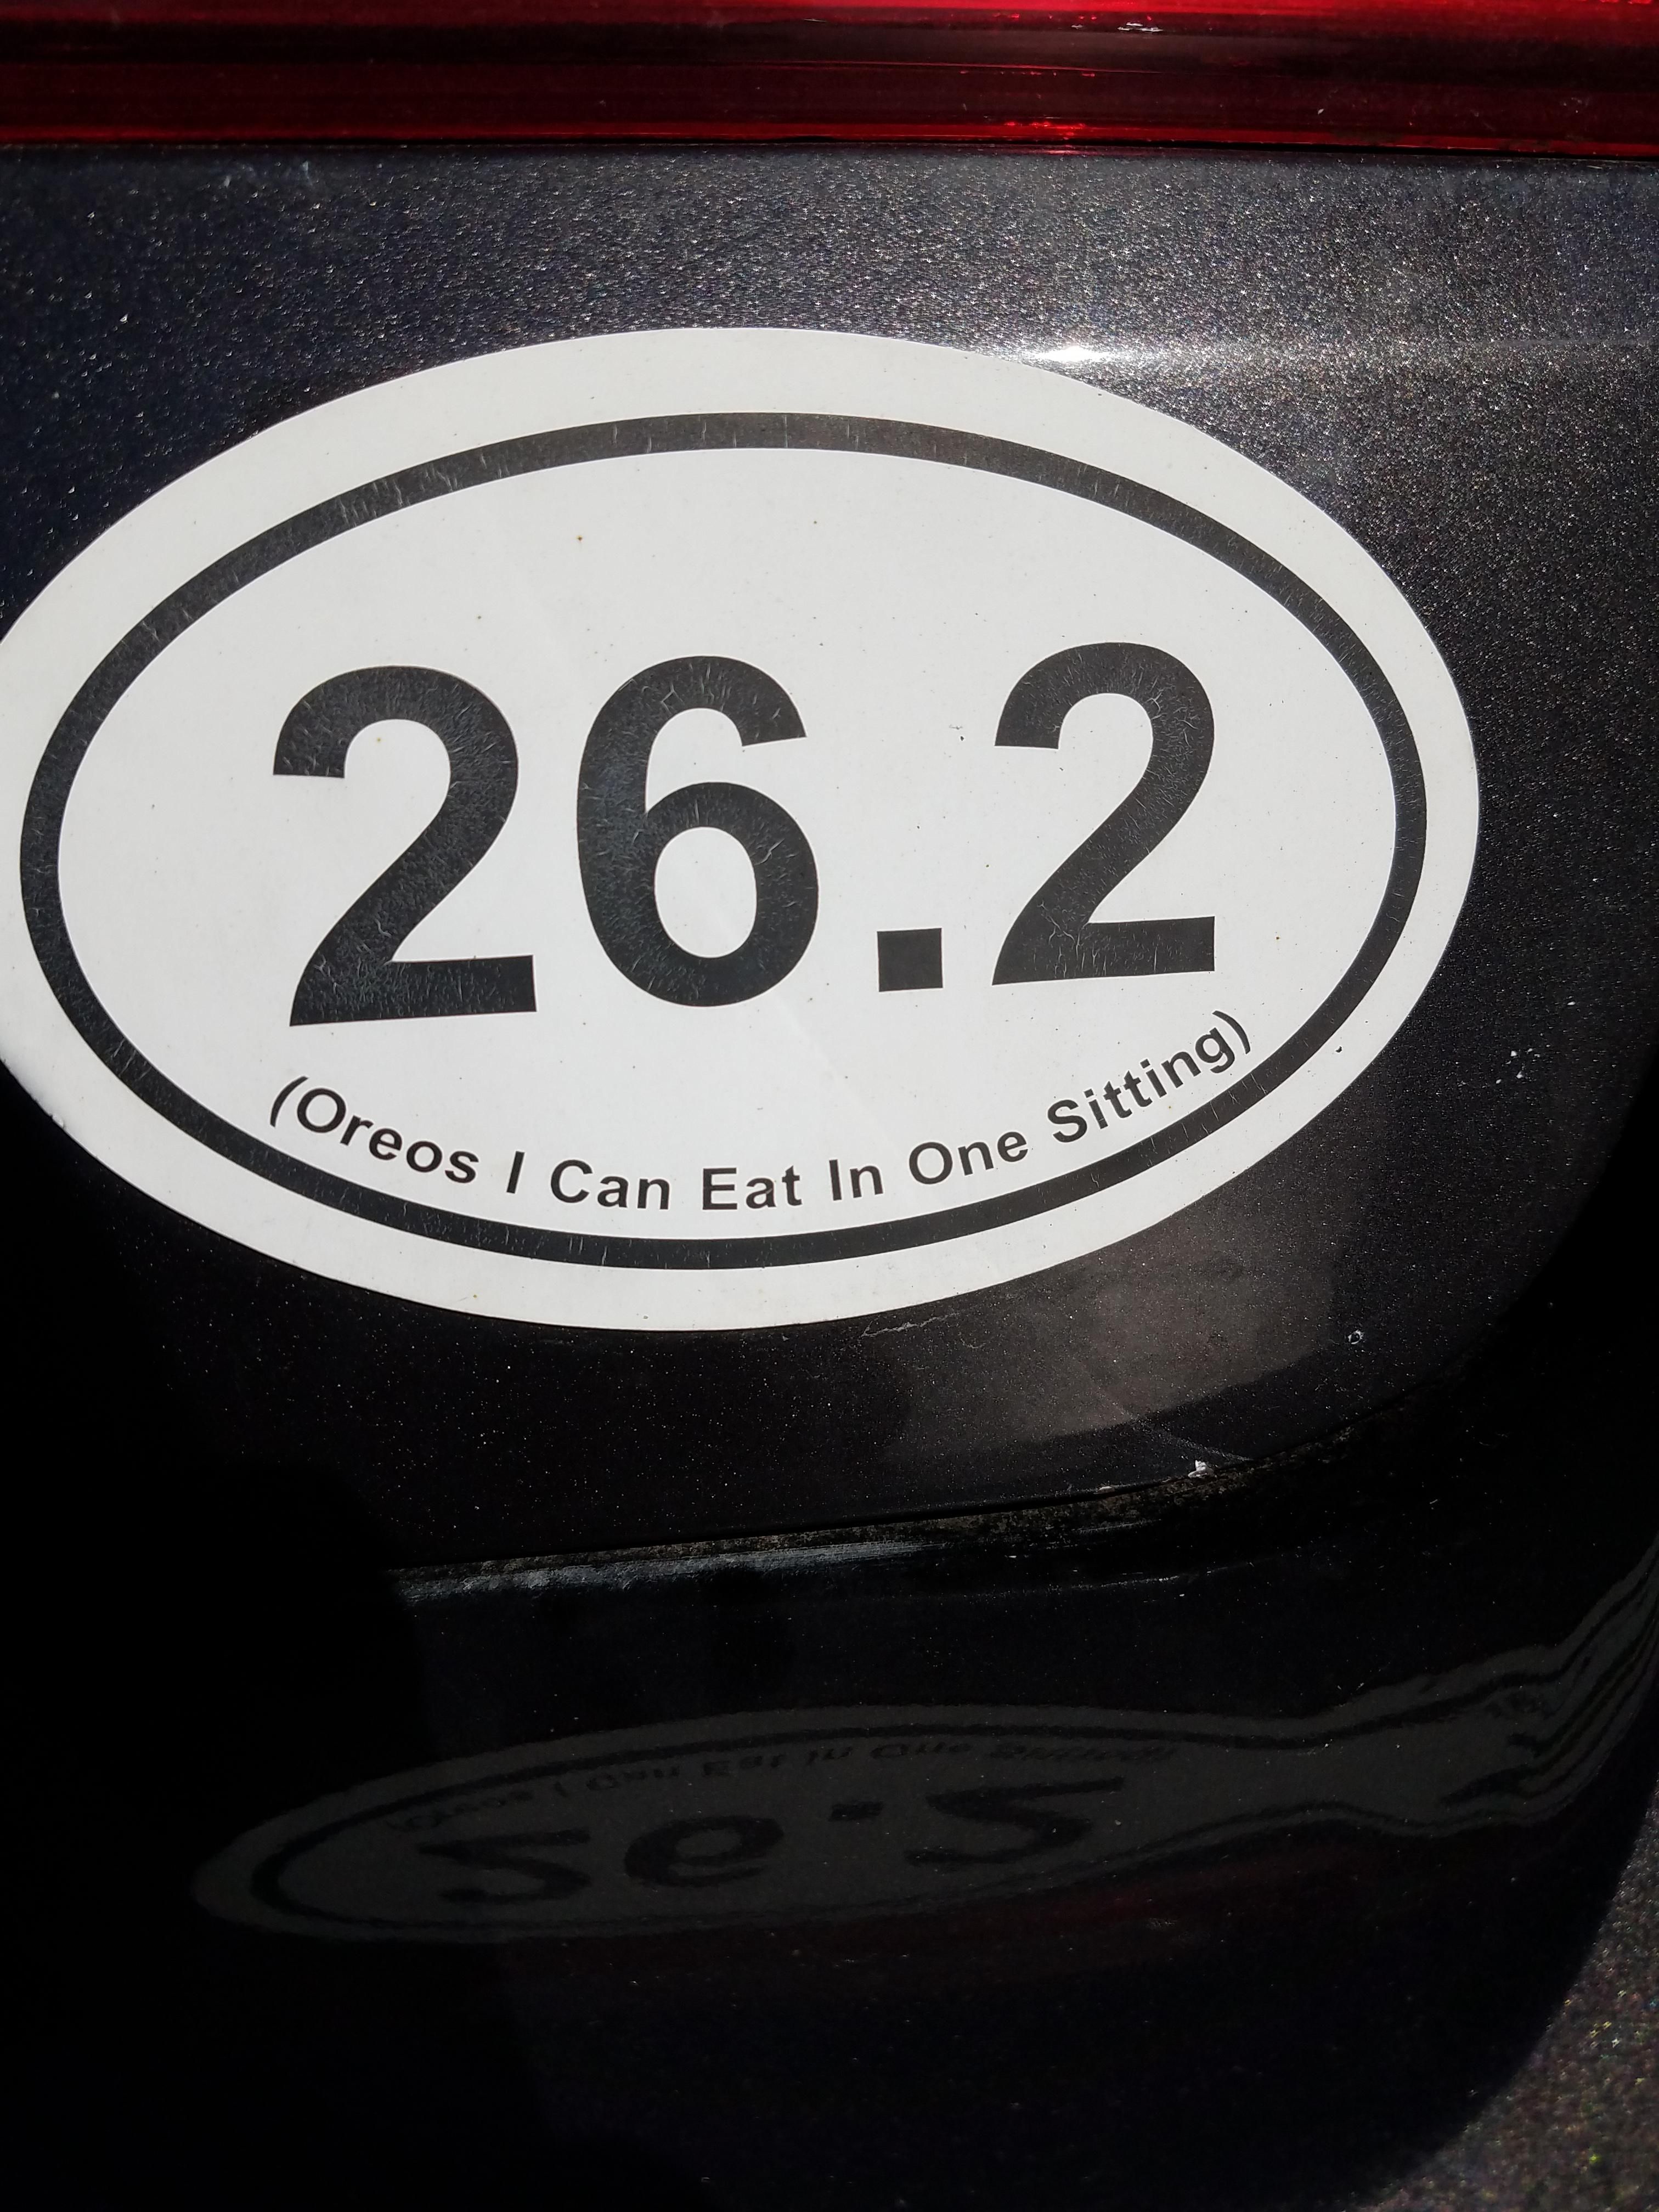 Found this bumper sticker the other day